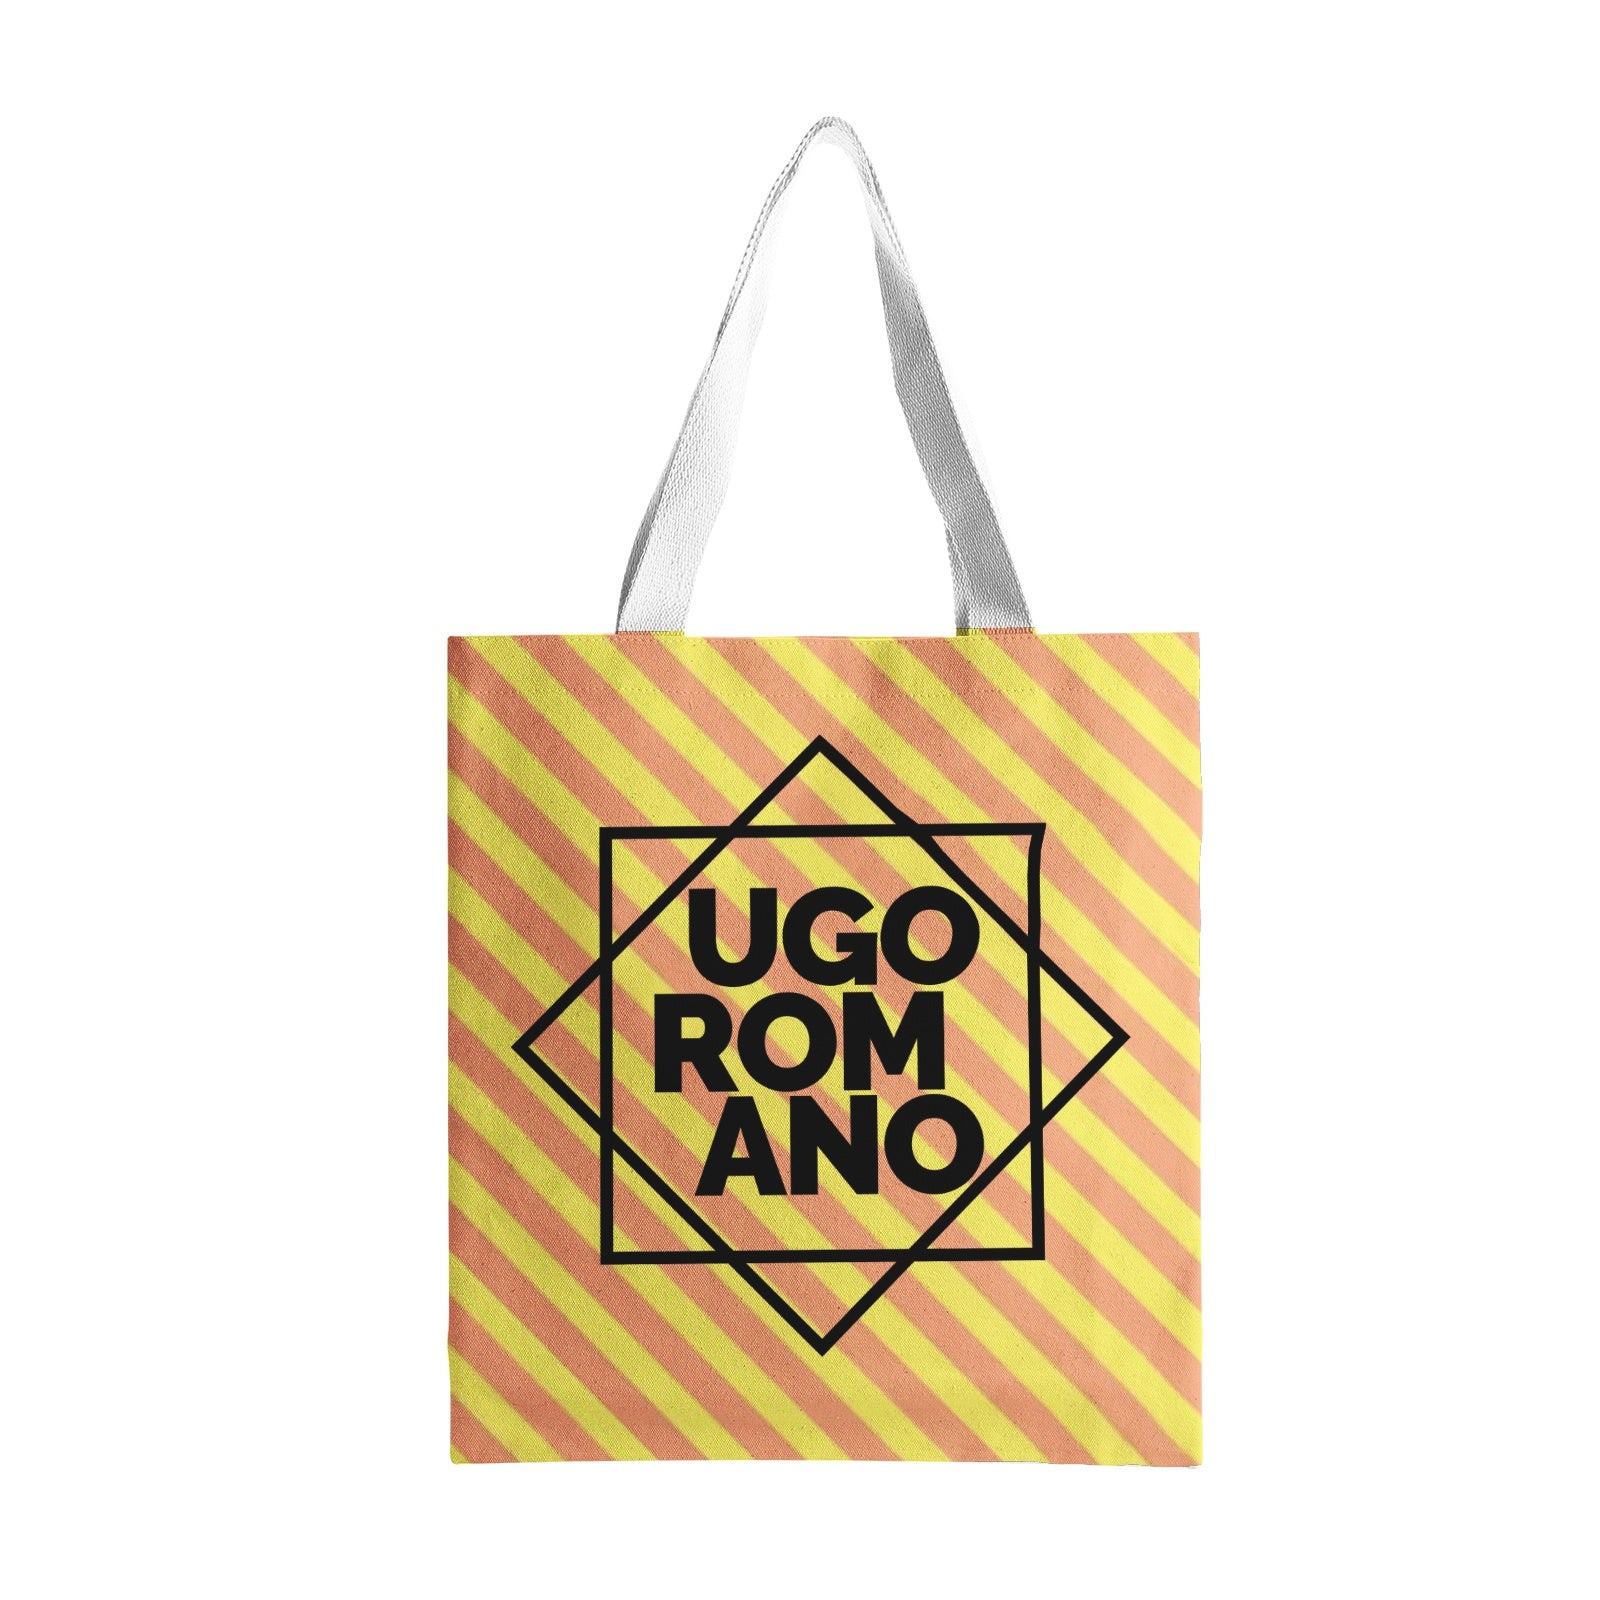 Heavy Duty and Strong Natural Cotton Canvas Tote Bag - UGO ROMANO URTB074